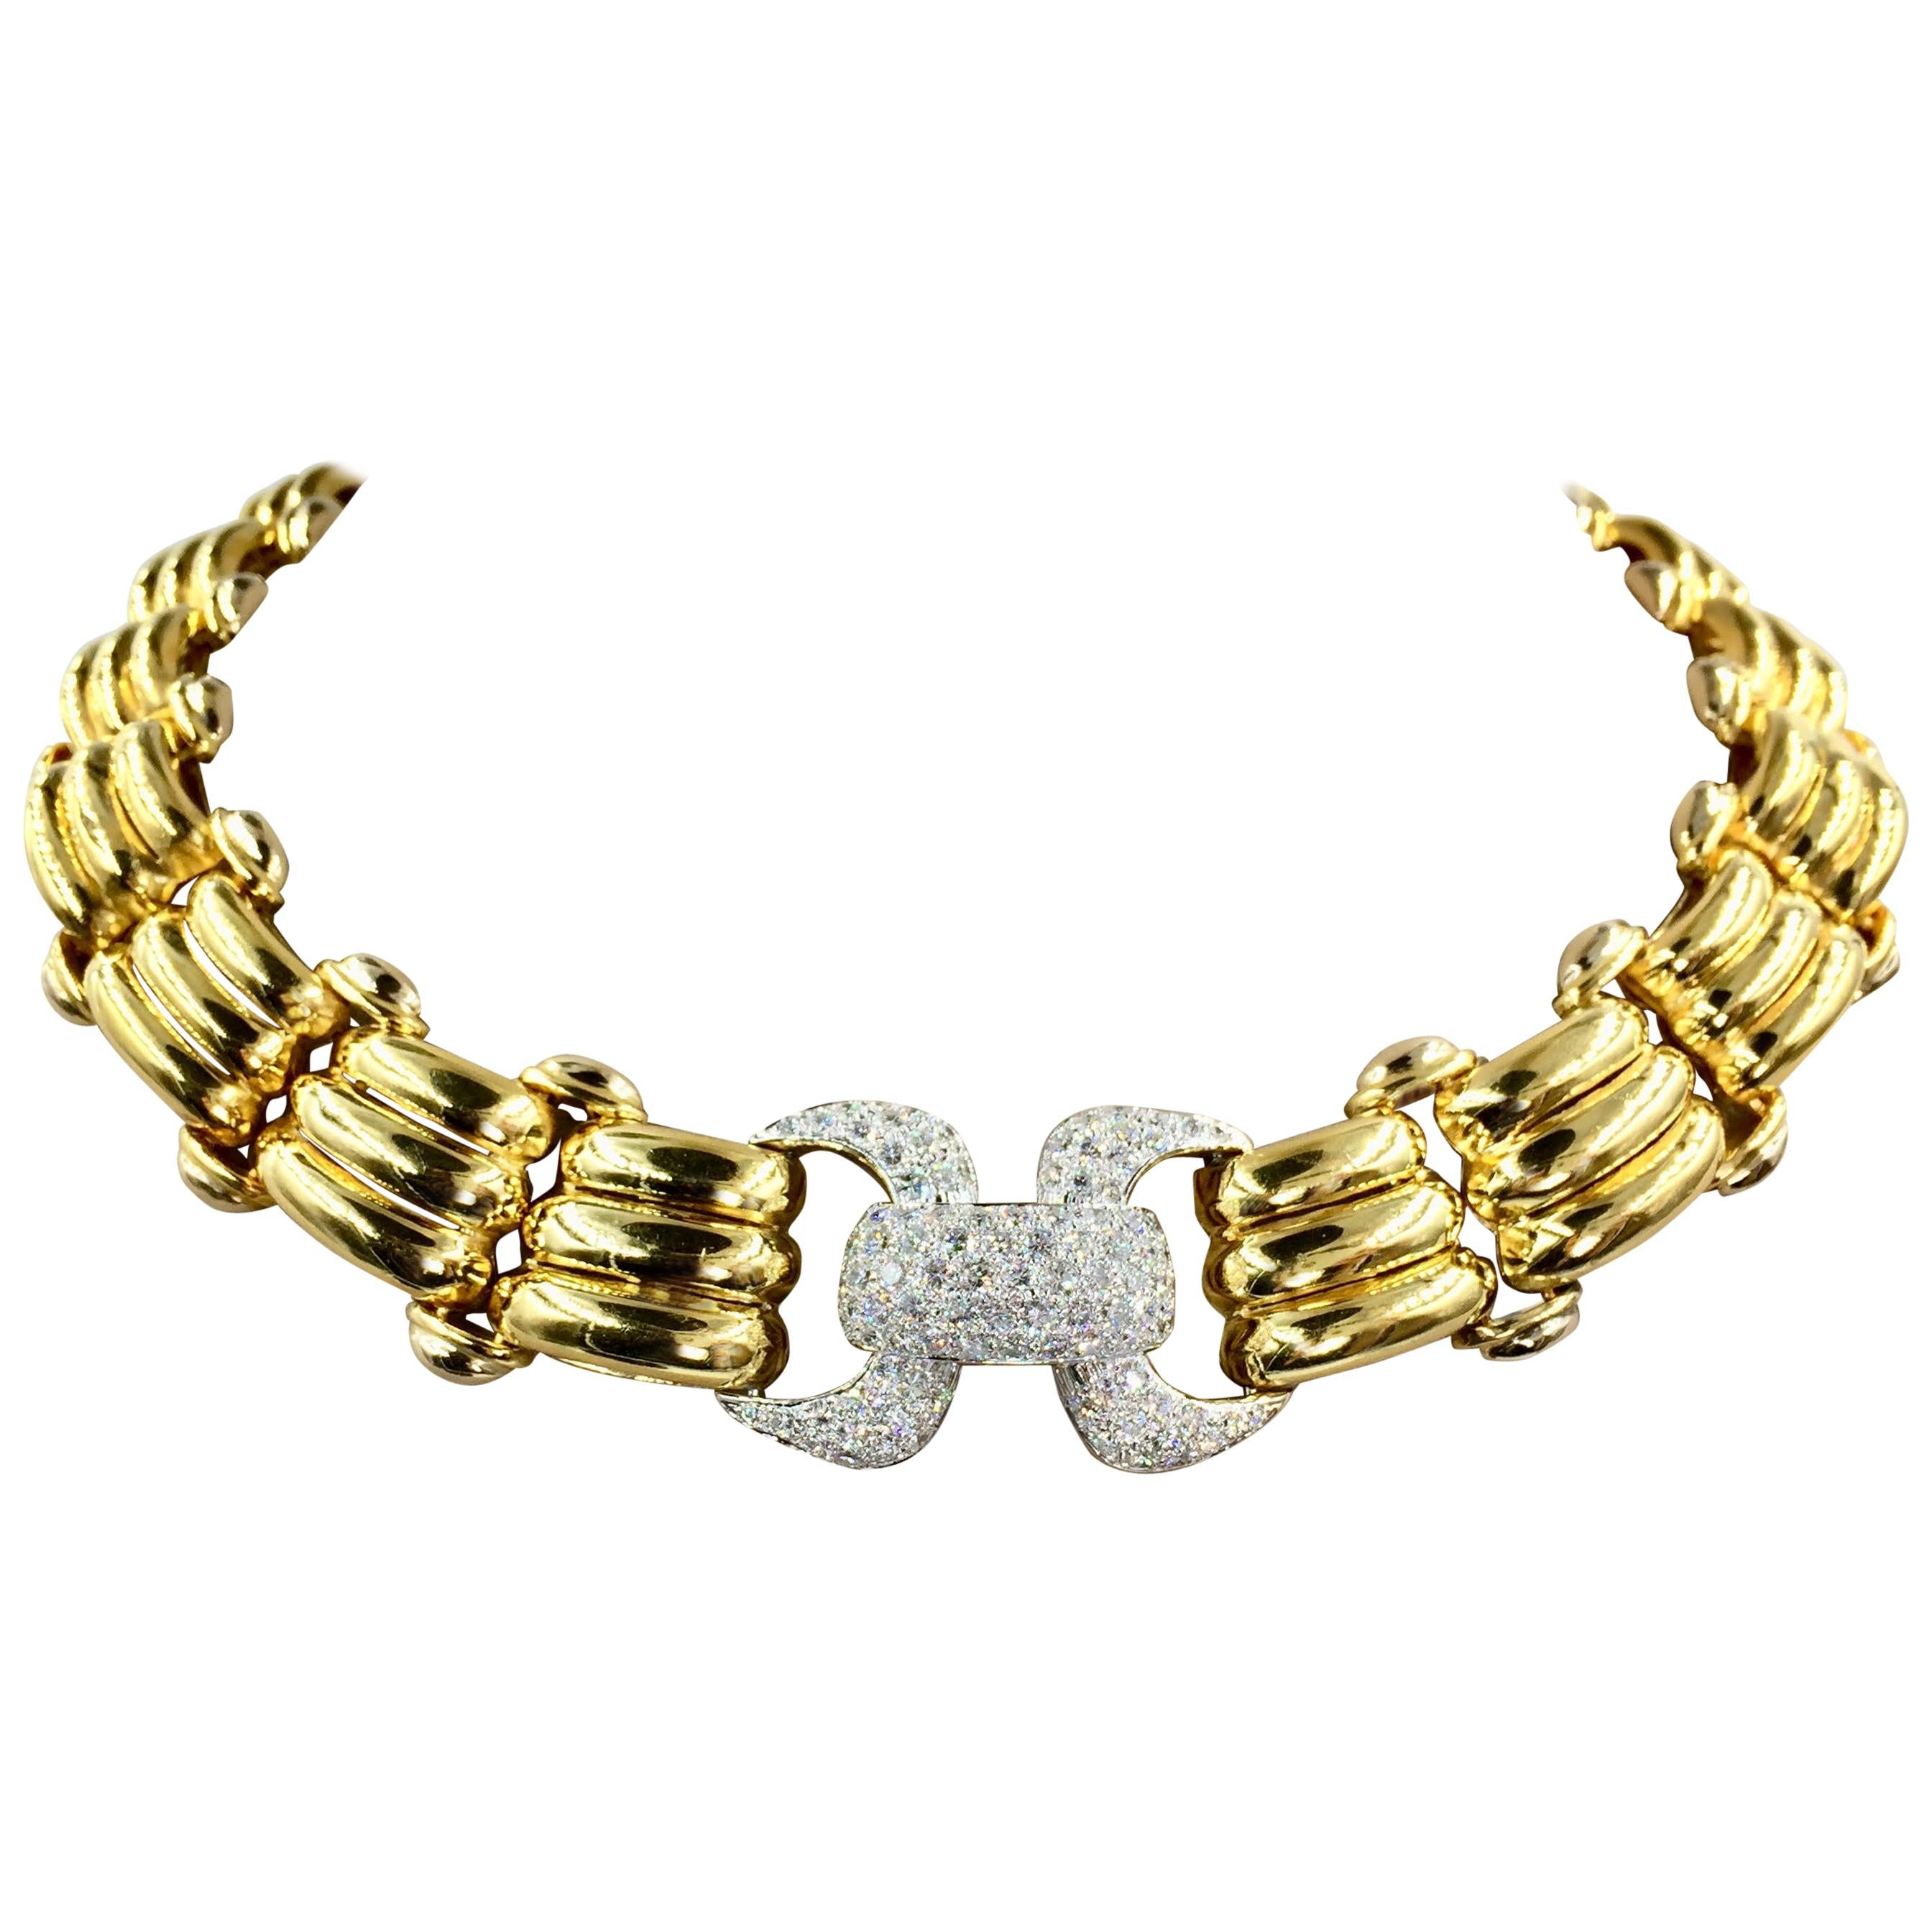 18 Karat Solid Gold Diamond Link Necklace 5.25 Diamond Carat Total Weight For Sale